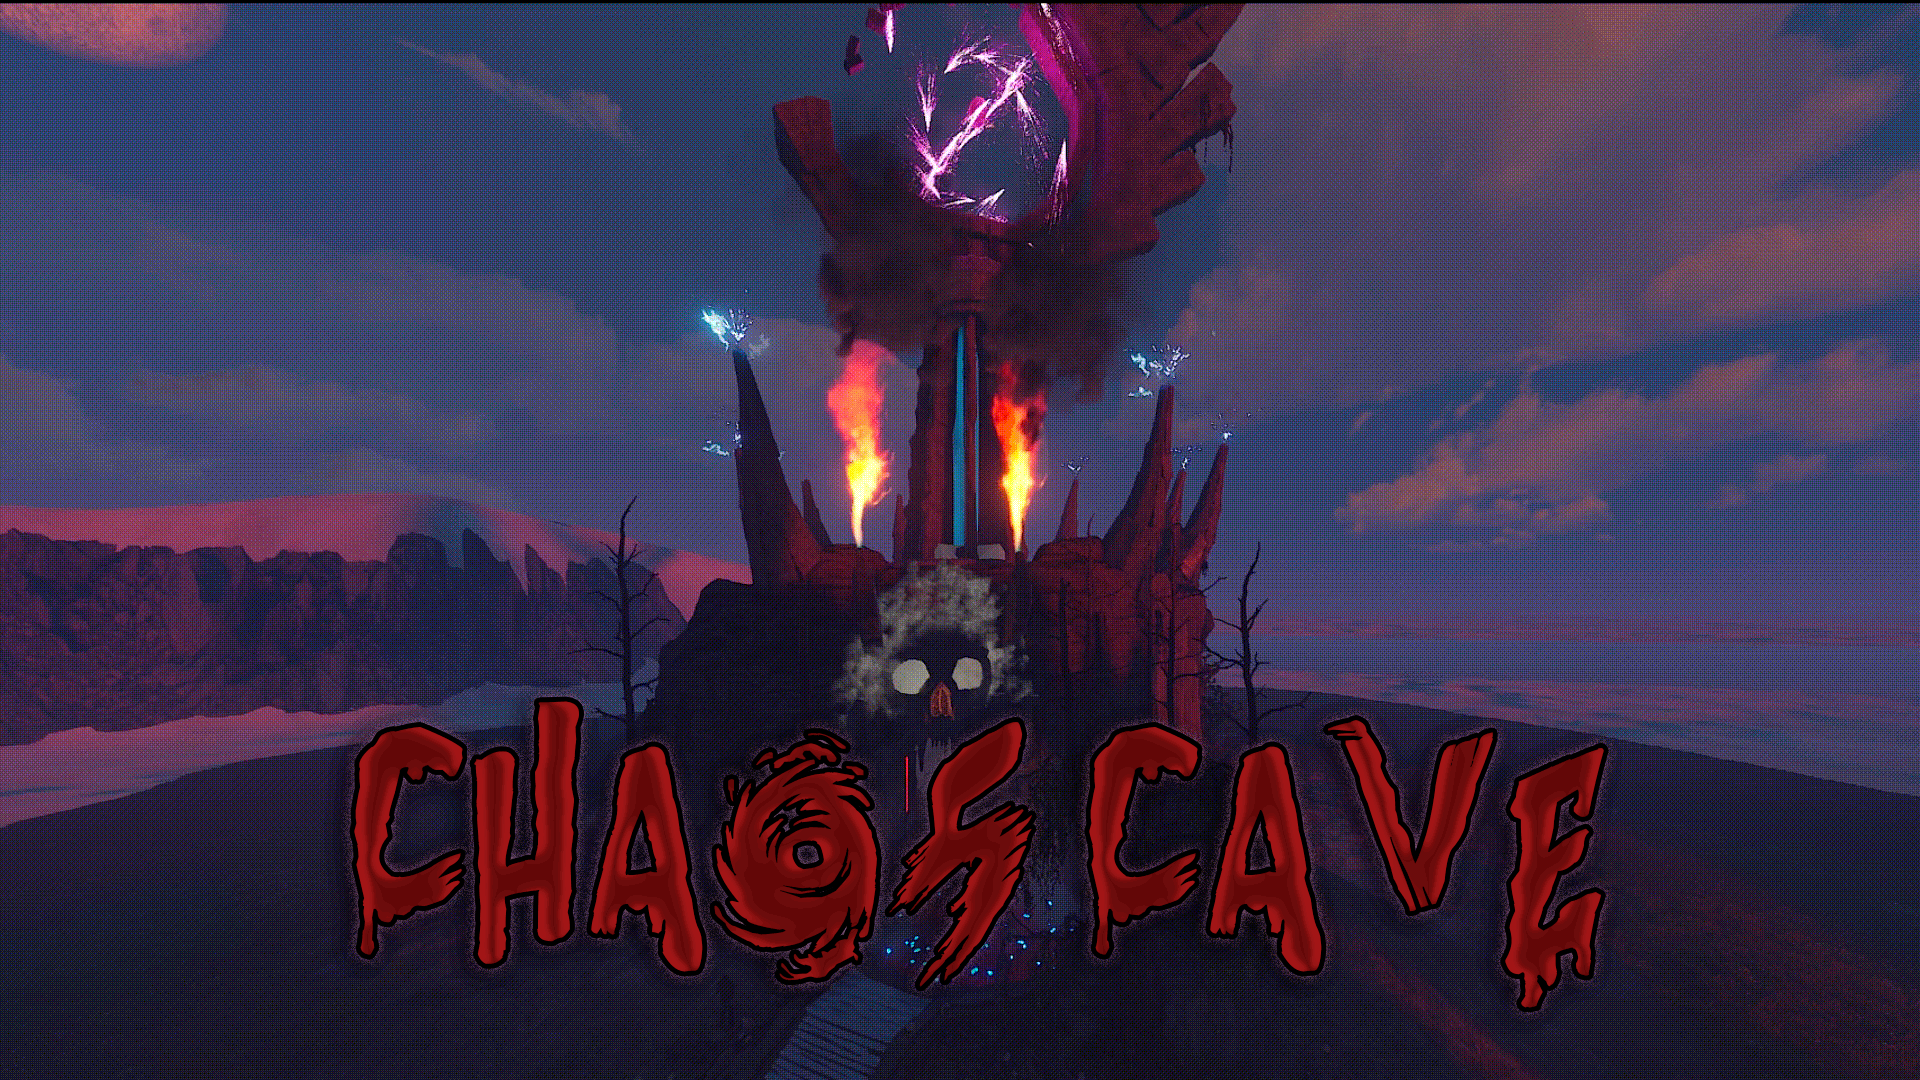 More information about "ChaosCave [HDRP]"